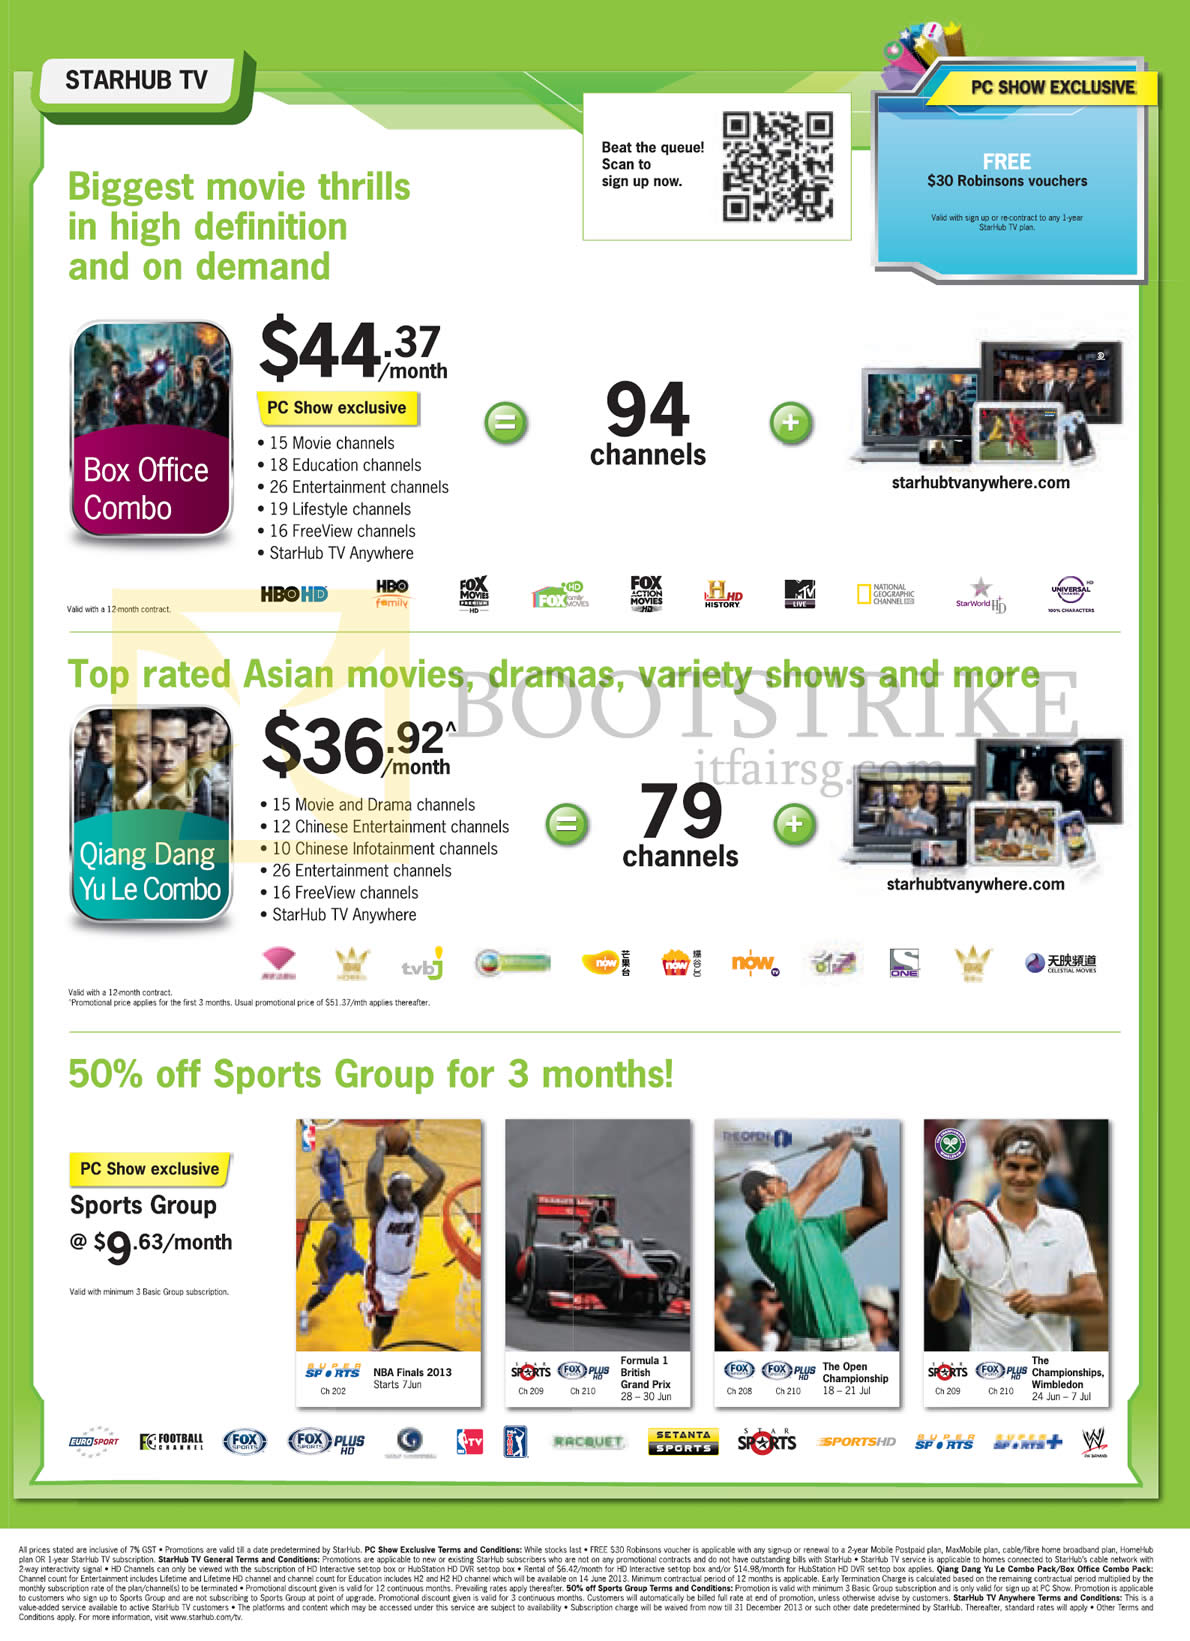 PC SHOW 2013 price list image brochure of Starhub TV Cable Box Office Combo, Qiang Dang Yu Le Combo, Sports Group